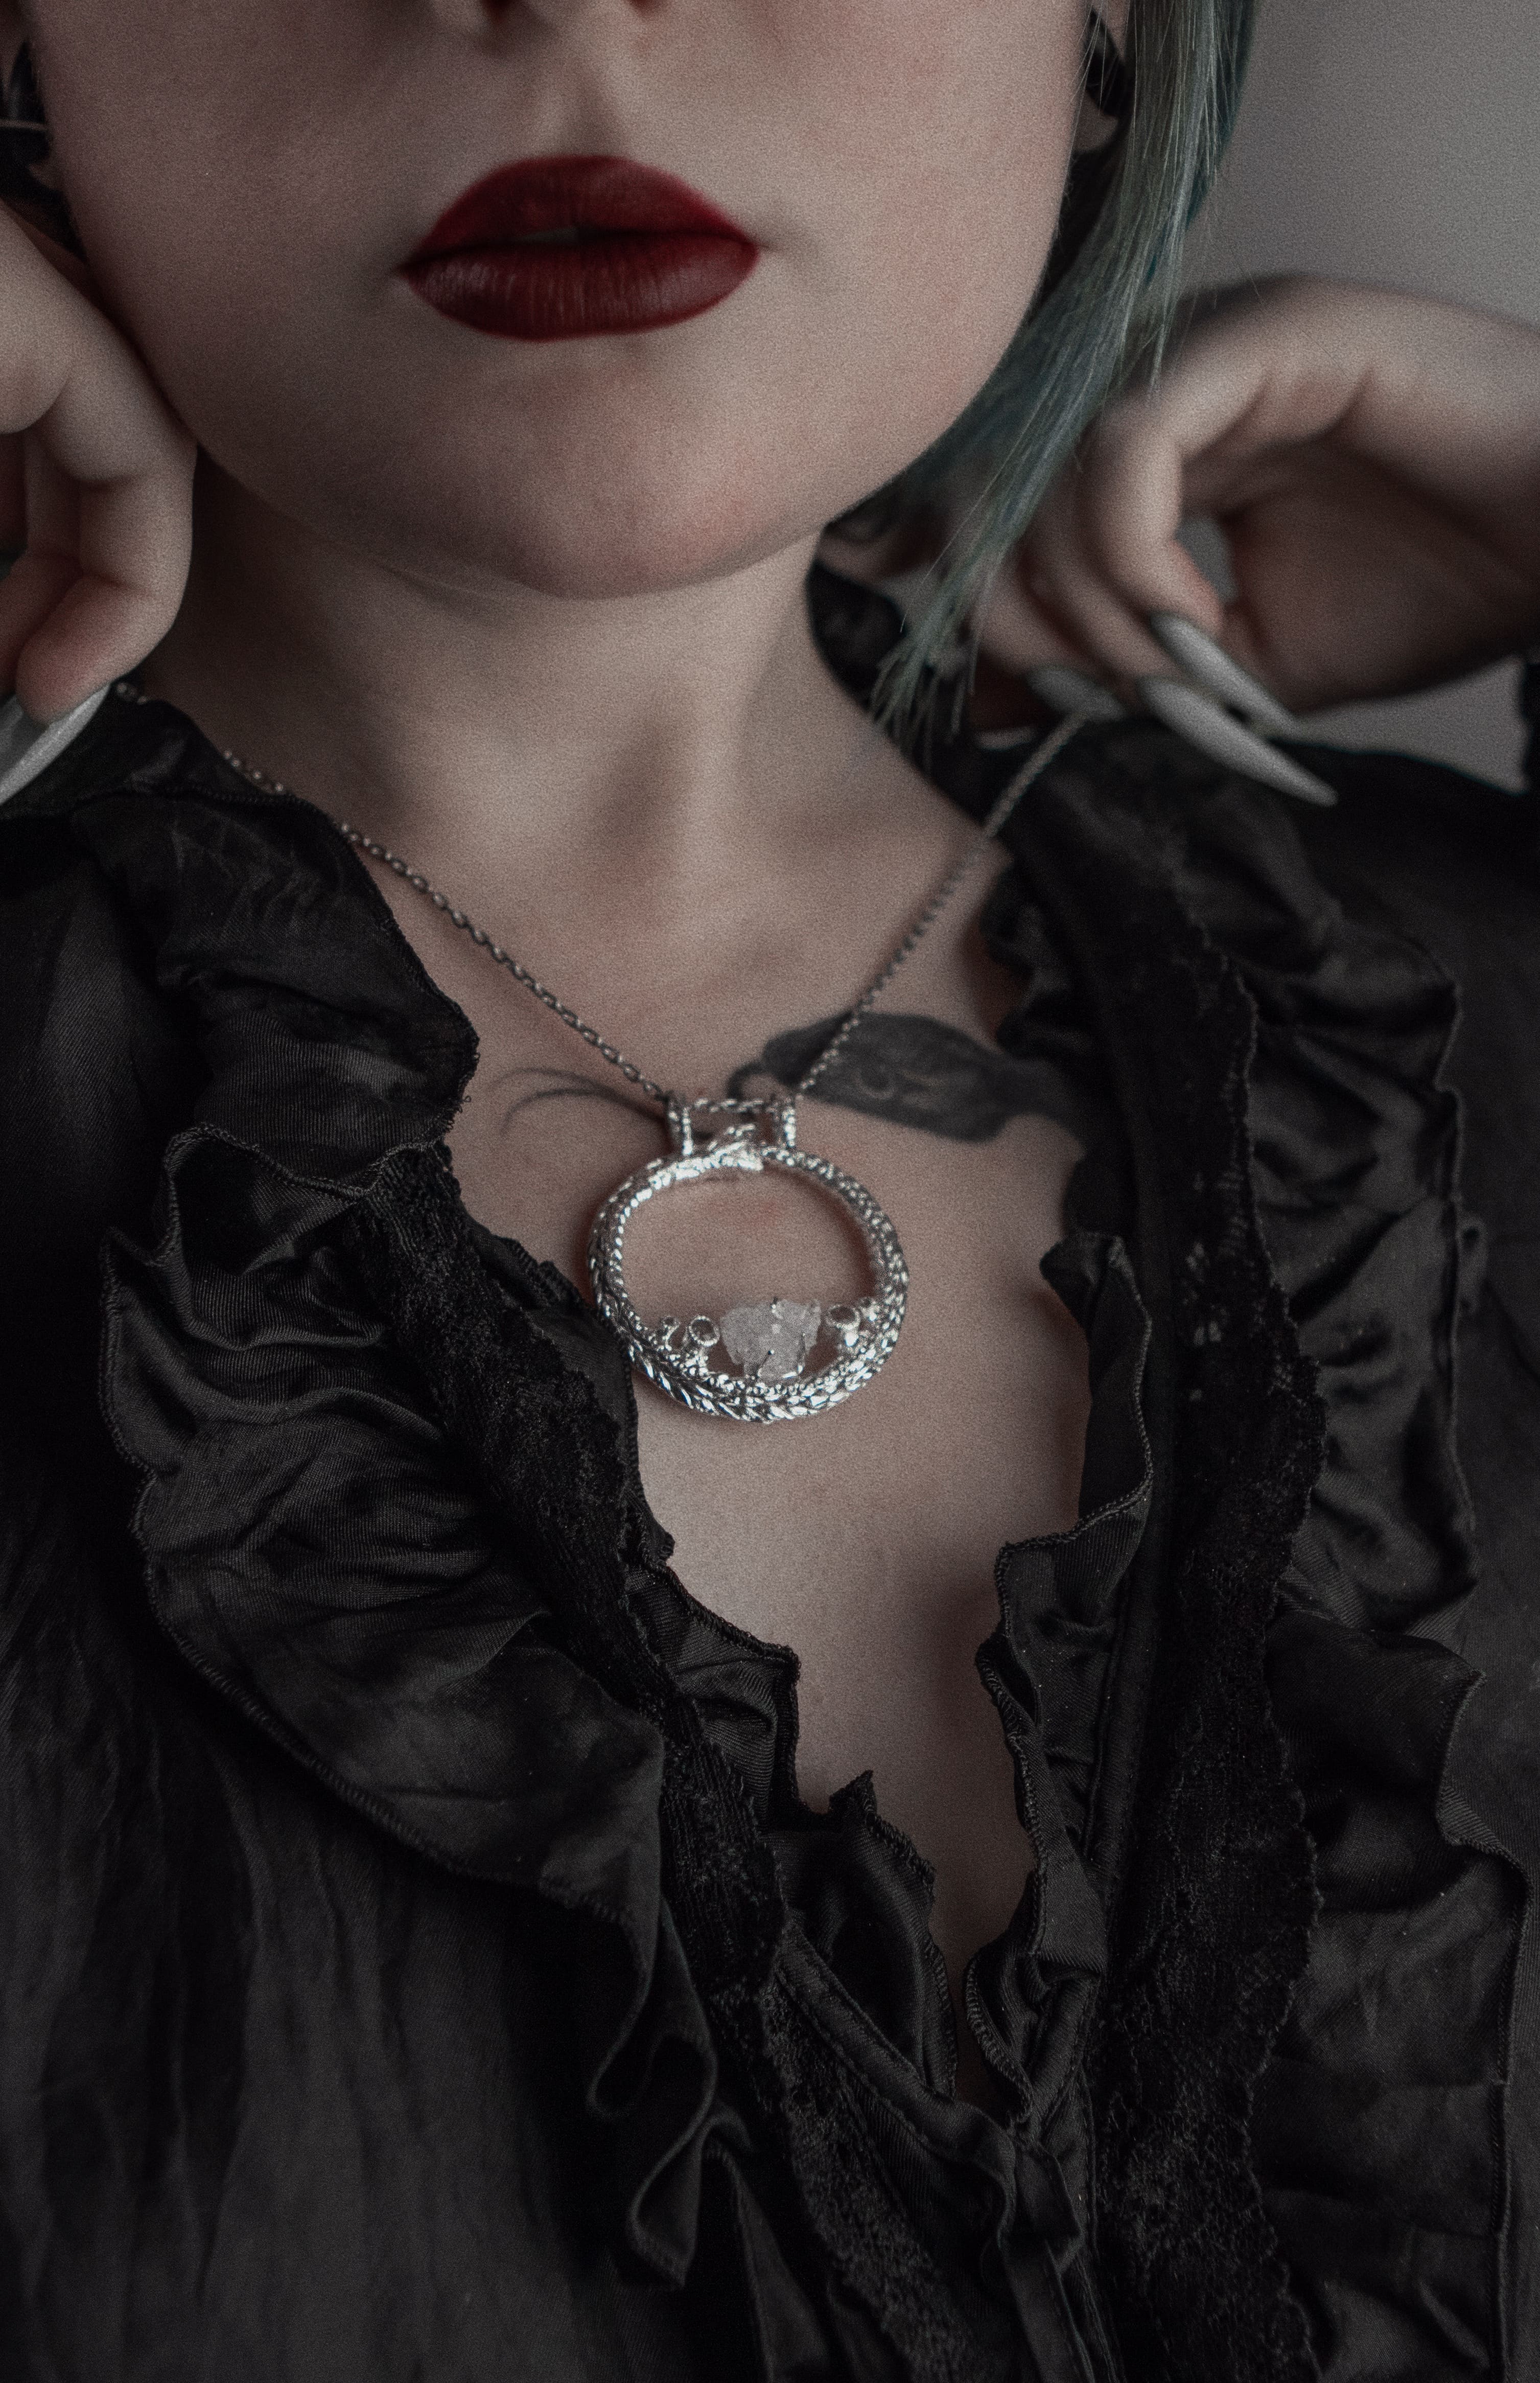 Ouroboros custom pendant with crystal and stones